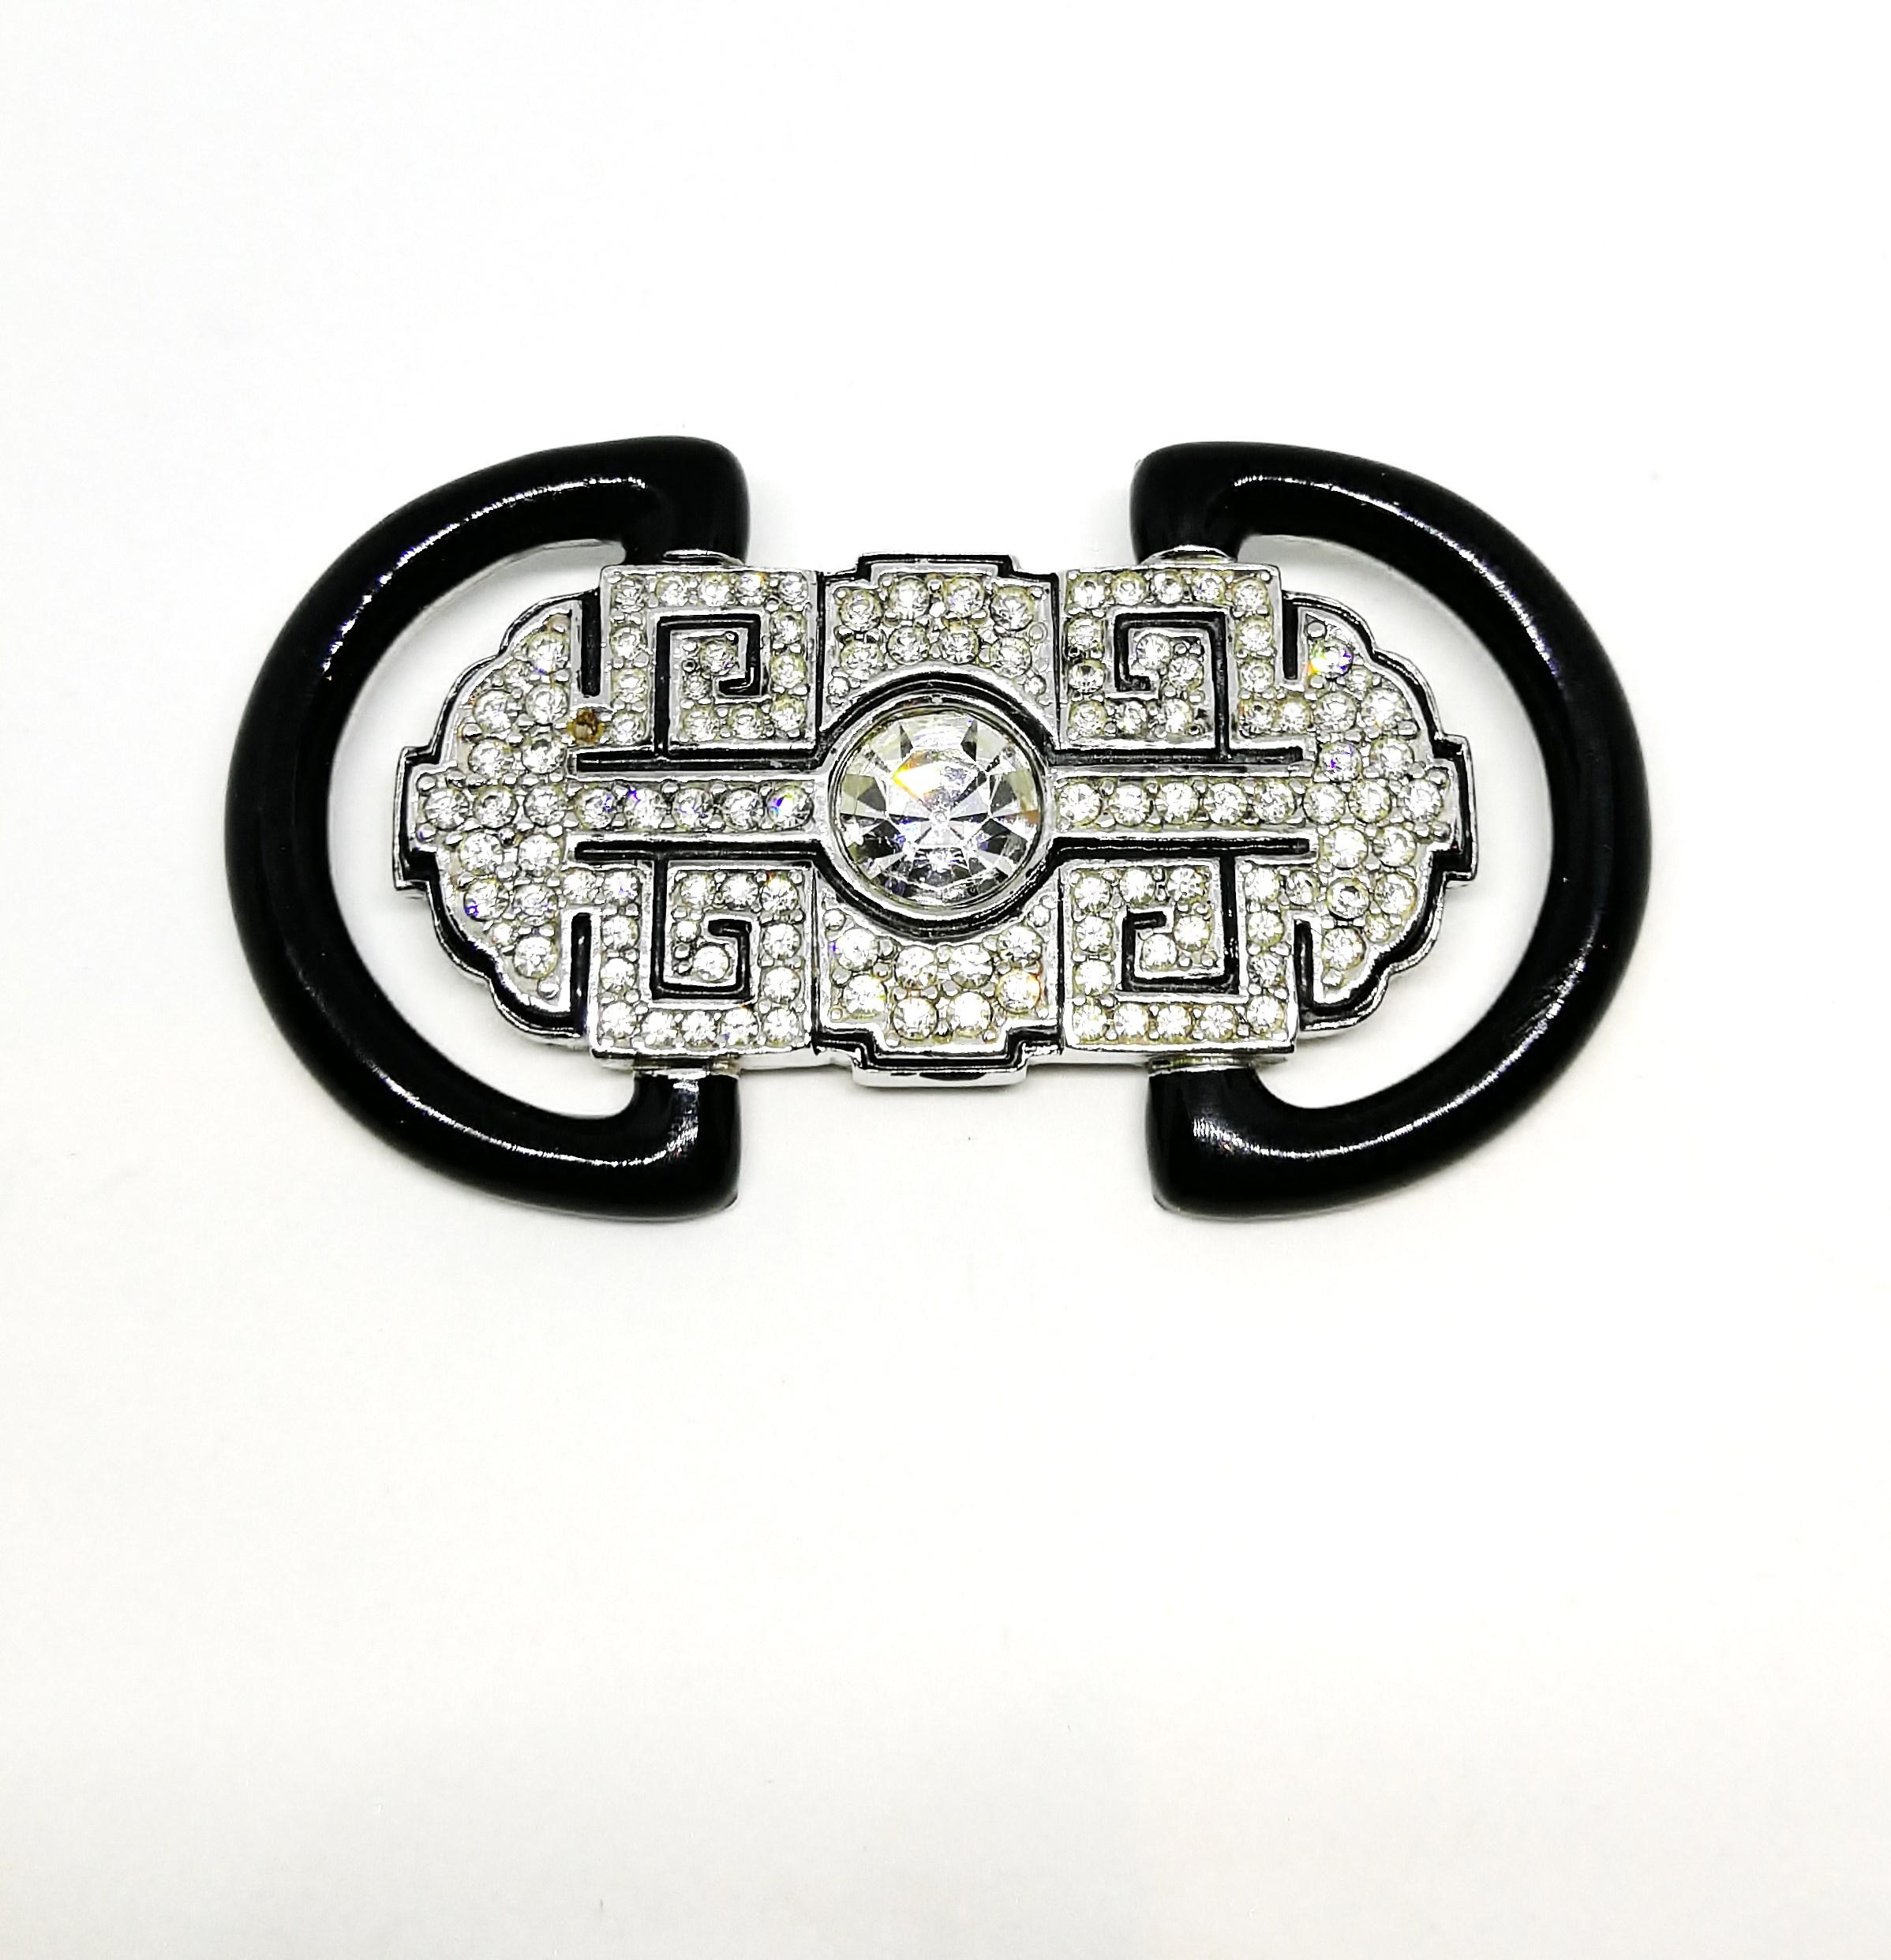 A large and dynamic brooch in high Art Deco style from Ciner, New York. Although made from base metal, enamel and paste, it echoes the wonderful designs of Cartier and Van Cleet and Arpels in its wishful, striking style, reflecting the magnificence